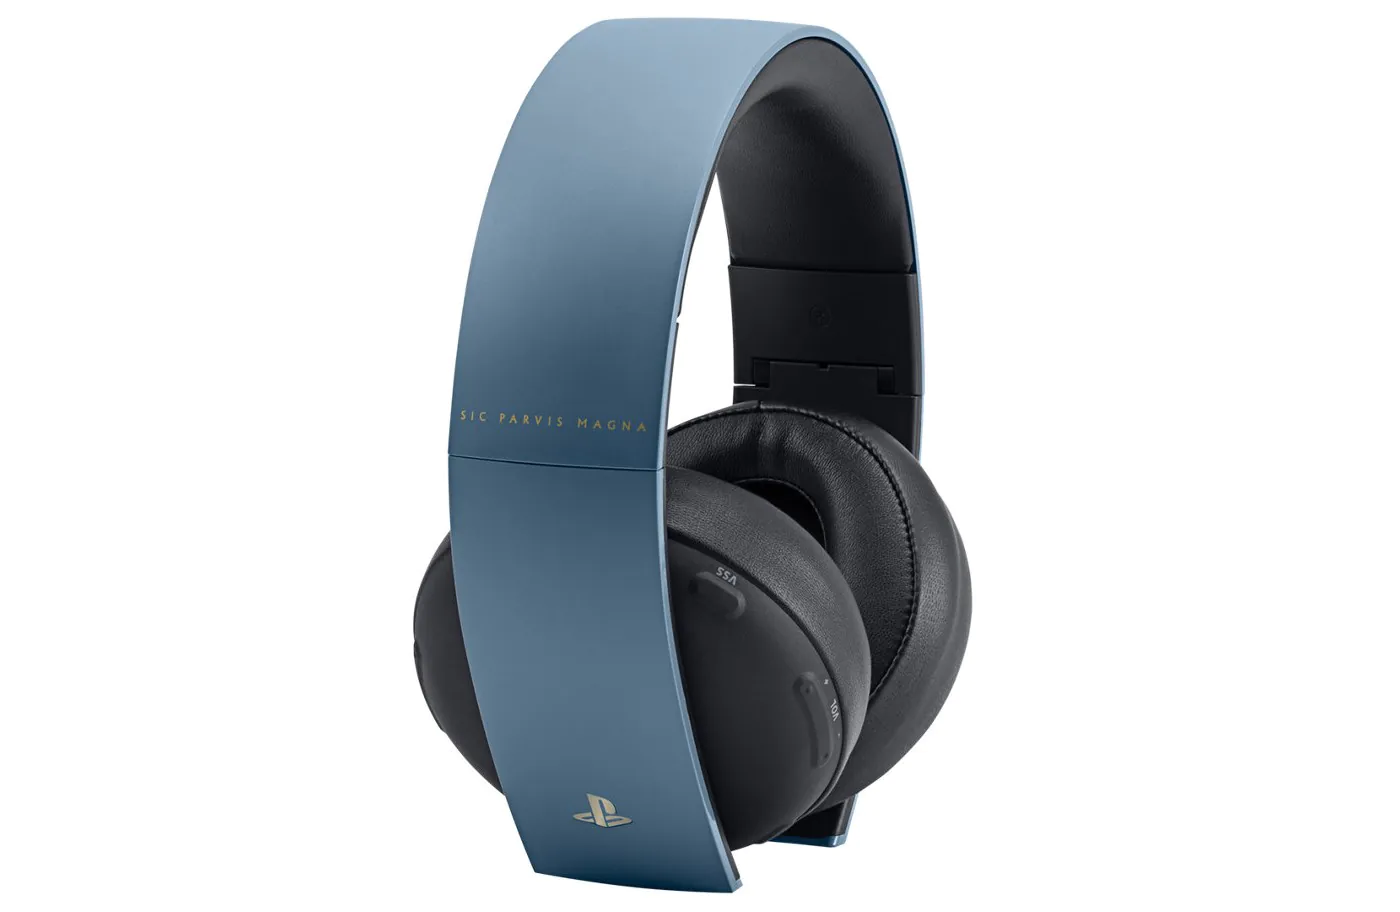 Limited Edition Uncharted 4 Gold Wireless Headset for PlayStation 4